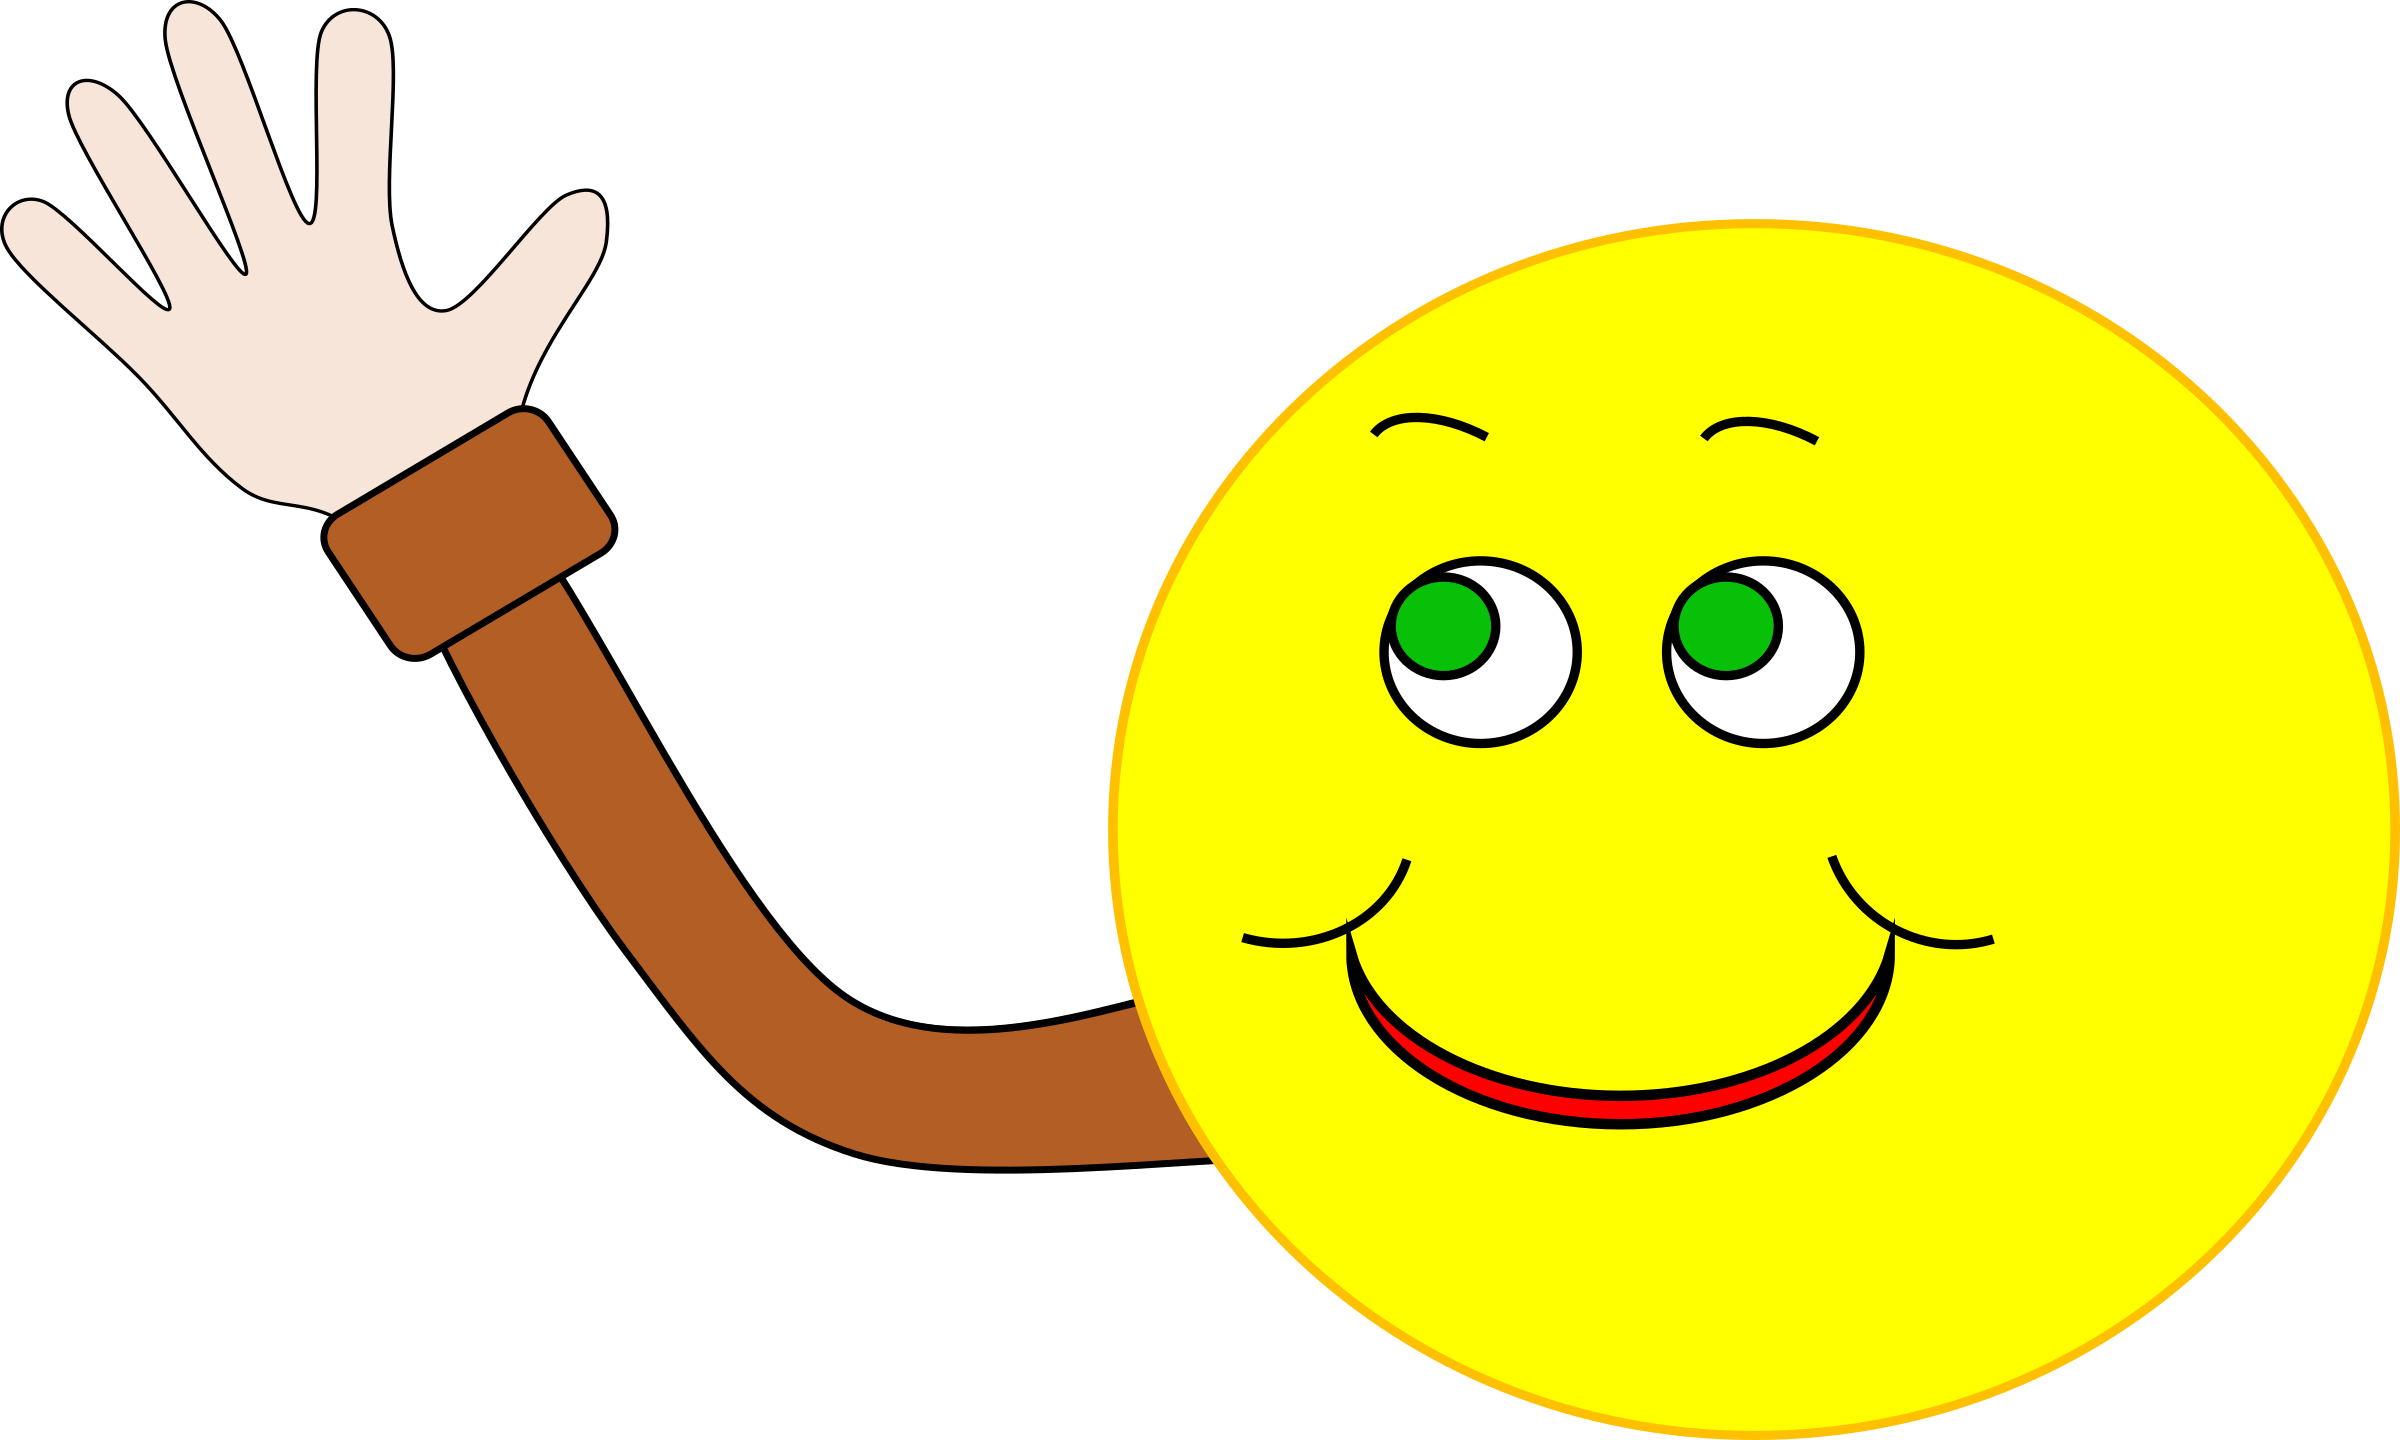 Smiley Waving - Animated Smiley Face Waving (2400x1440)